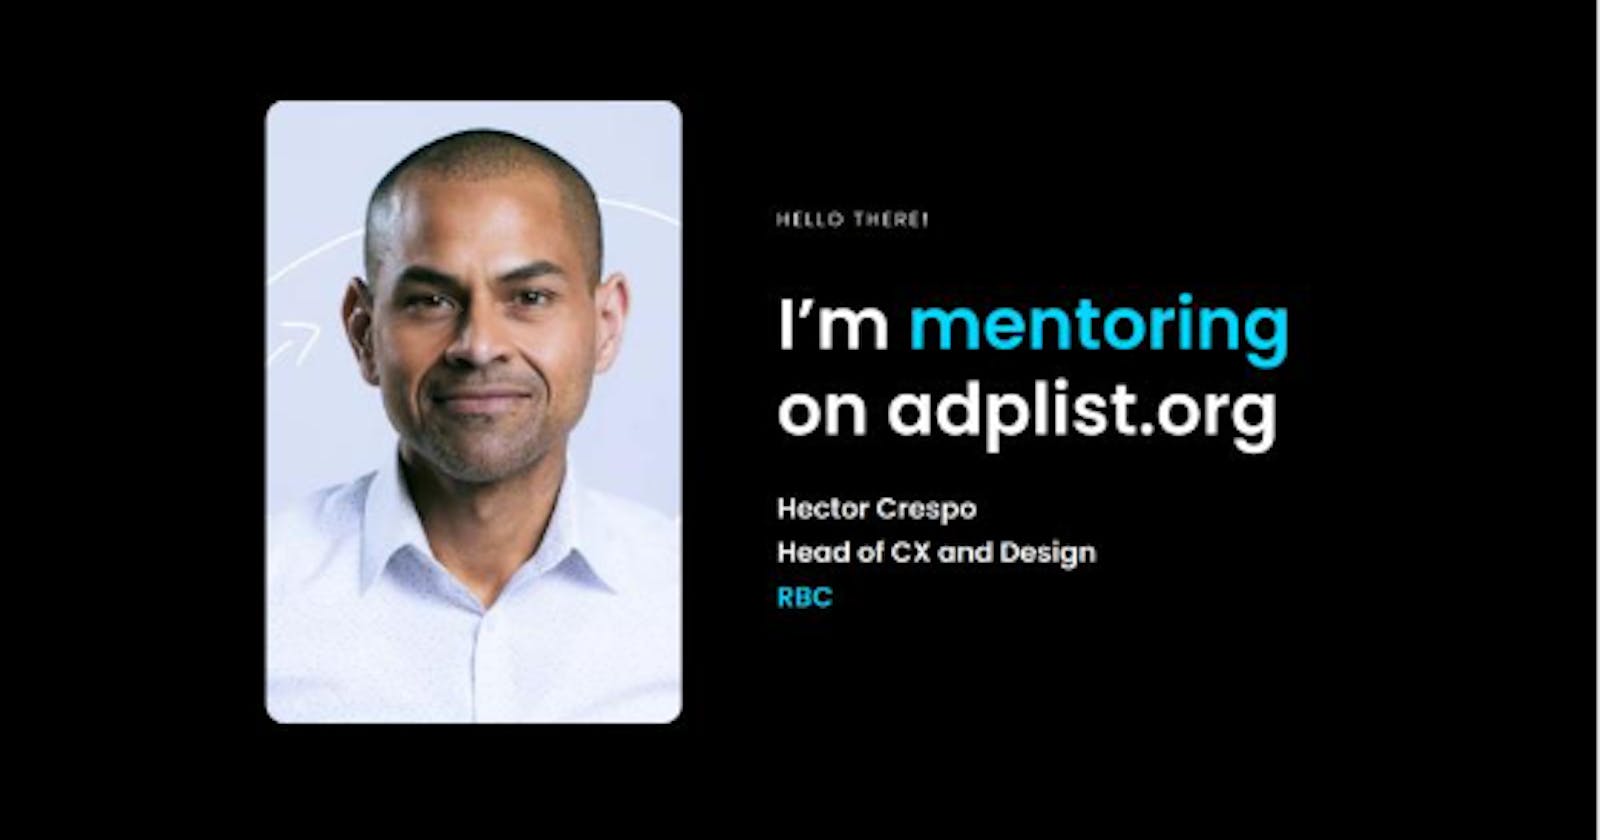 Day 1/100 in #100daysofDesign - Kickstarting with a mentorship session with Hector Crespo.